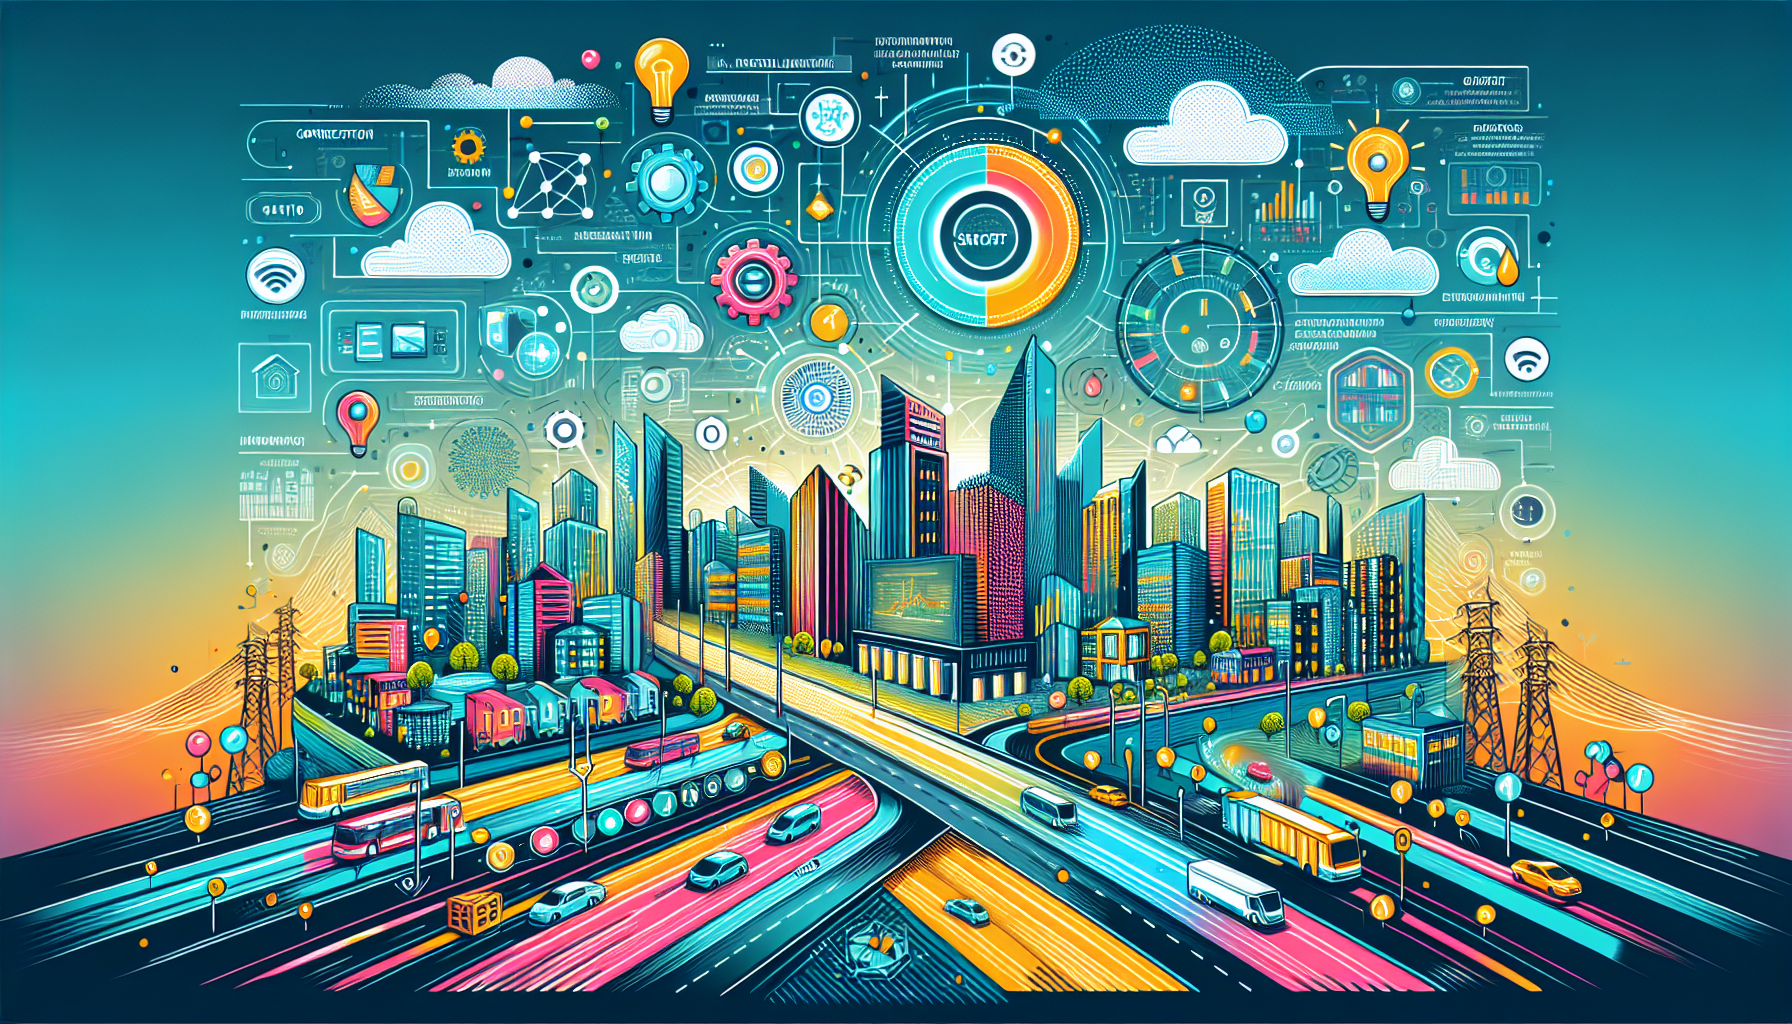 Exploring the World of Connected Smart Cities